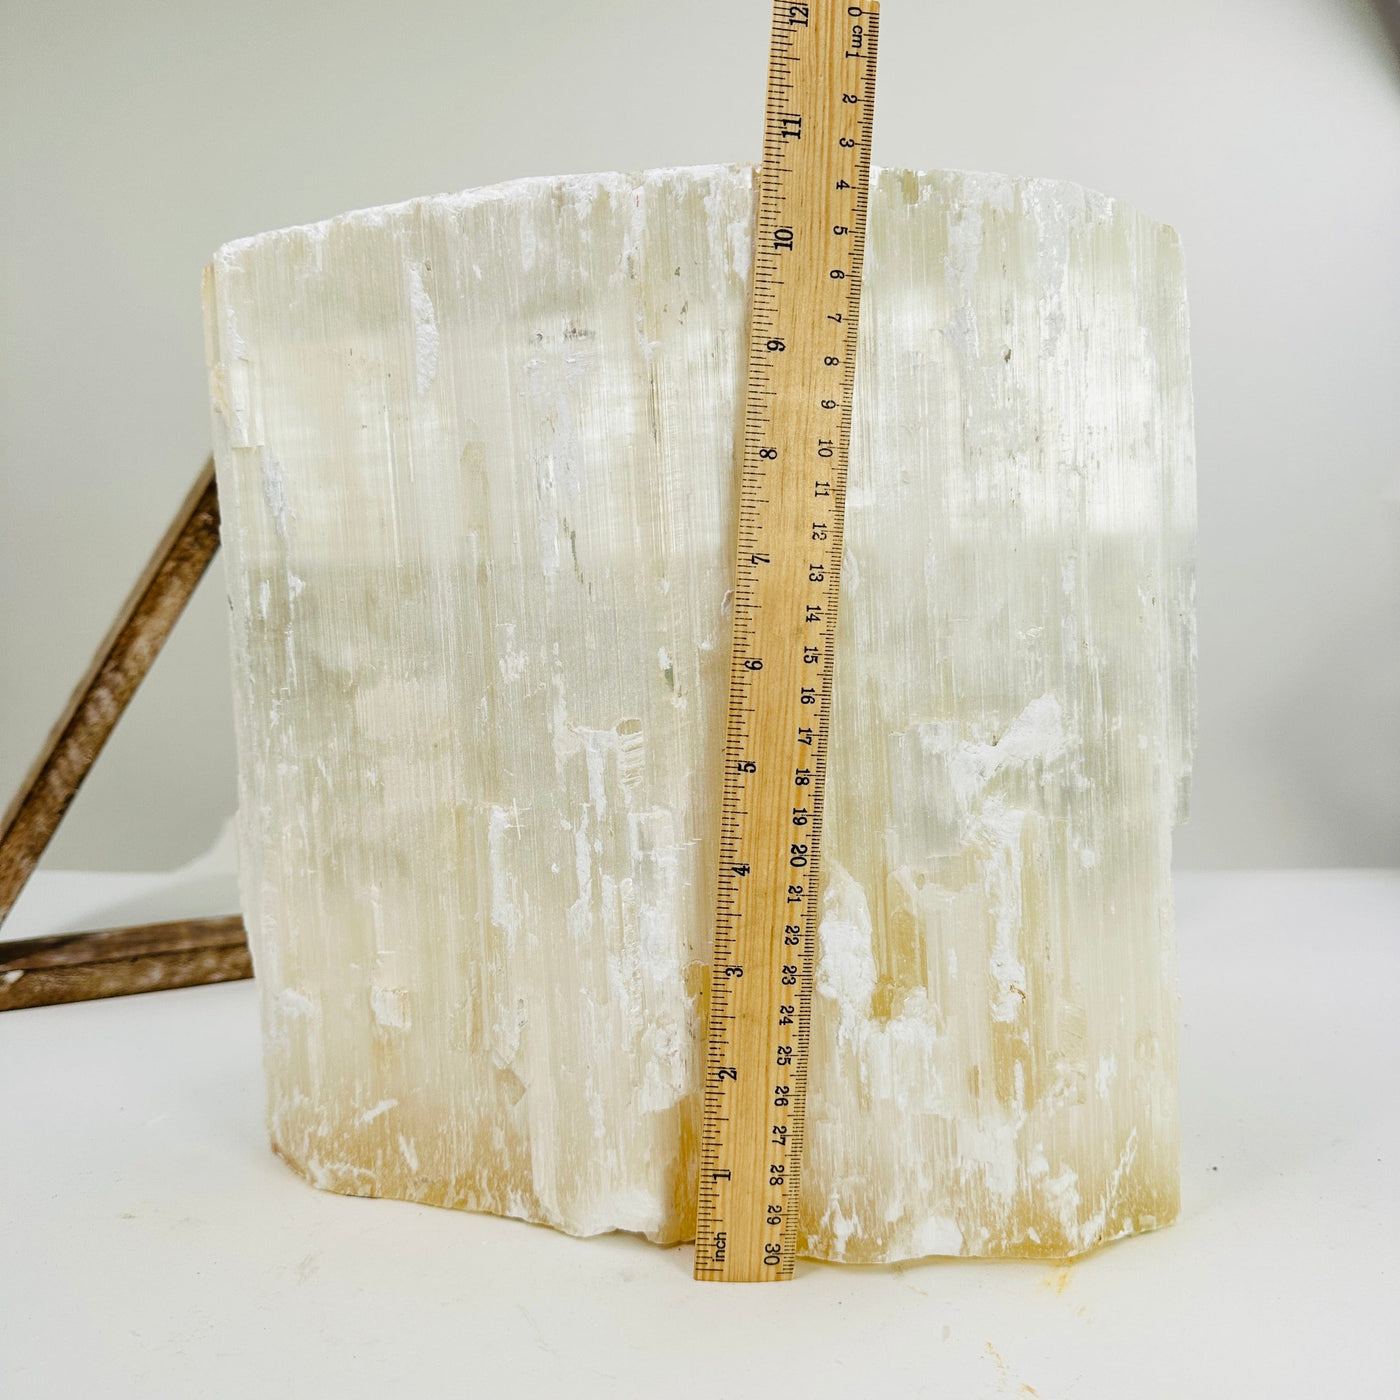 selenite cluster next to a ruler for size reference